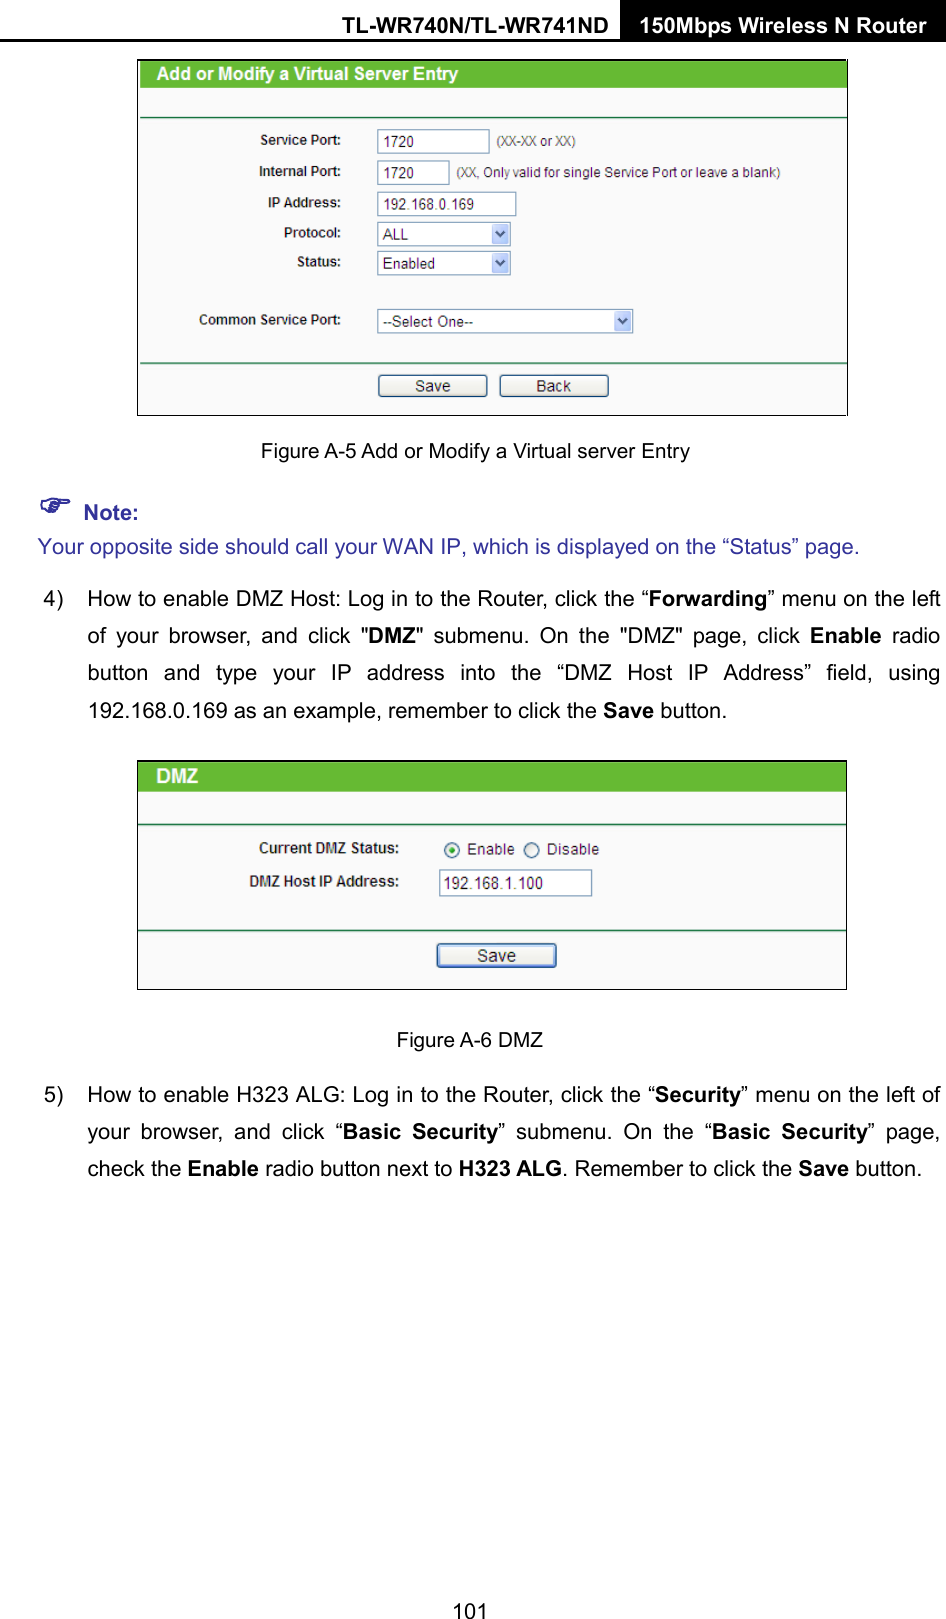 TL-WR740N/TL-WR741ND 150Mbps Wireless N Router    Figure A-5 Add or Modify a Virtual server Entry  Note: Your opposite side should call your WAN IP, which is displayed on the “Status” page. 4) How to enable DMZ Host: Log in to the Router, click the “Forwarding” menu on the left of your browser, and click &quot;DMZ&quot; submenu. On the &quot;DMZ&quot; page, click Enable radio button and type your IP address into the “DMZ Host IP Address” field, using 192.168.0.169 as an example, remember to click the Save button.    Figure A-6 DMZ 5) How to enable H323 ALG: Log in to the Router, click the “Security” menu on the left of your browser, and click “Basic Security”  submenu.  On the “Basic Security”  page, check the Enable radio button next to H323 ALG. Remember to click the Save button. 101 